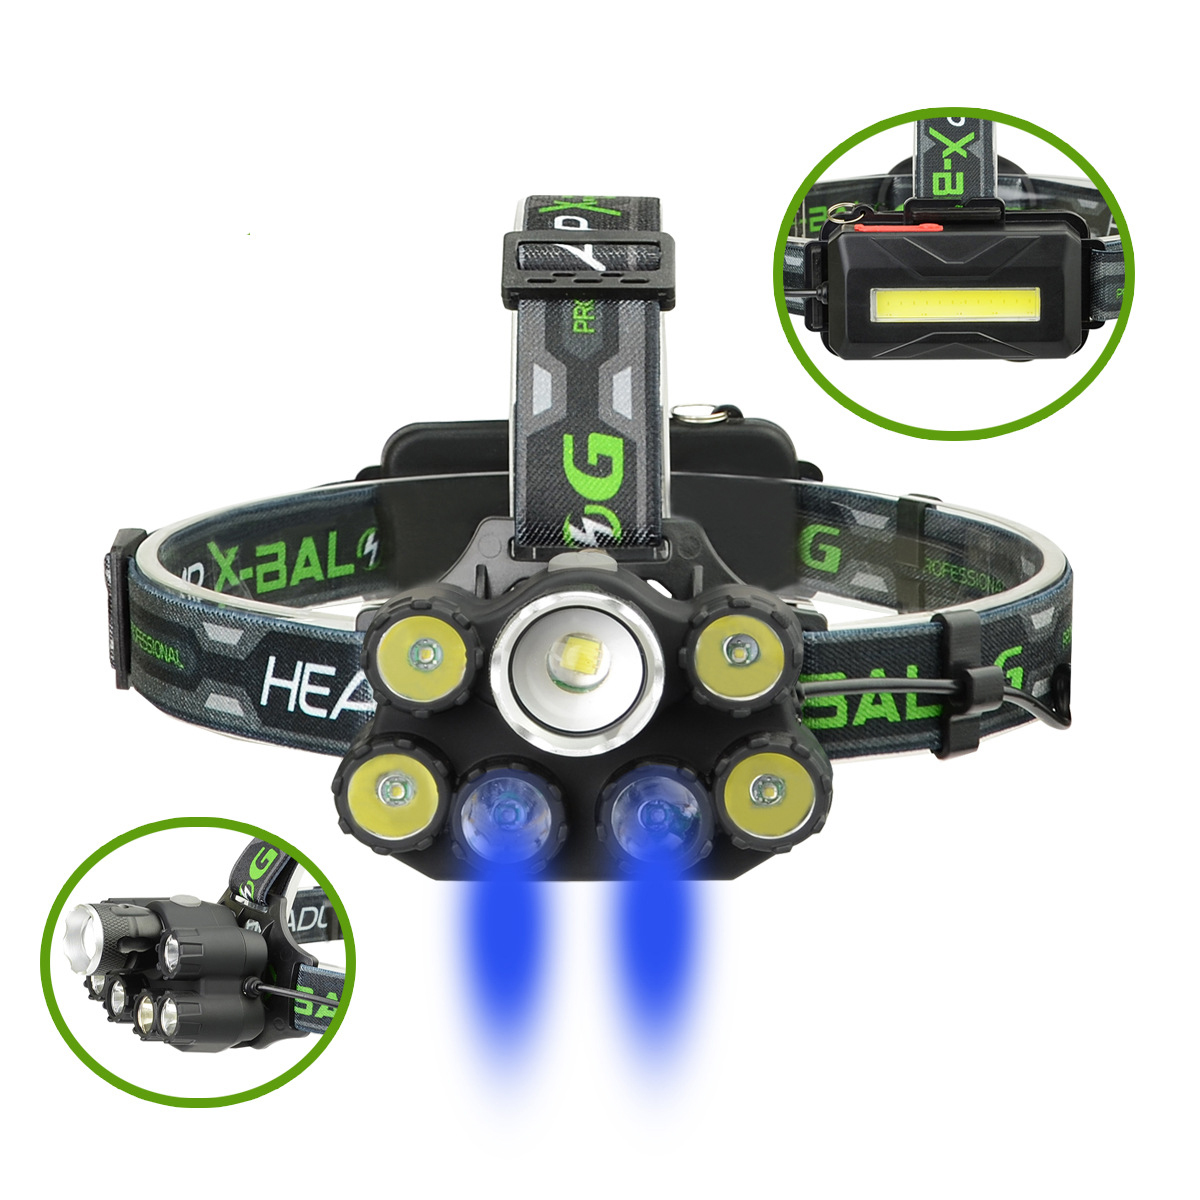 

XANES BL-T76-B6 2500LM T6-4XPE-Blue LED 6 Modes Telescopic Zoom Cycling Hunting Camping Outdoor Headlamp COB Back Light USB Charging Interface